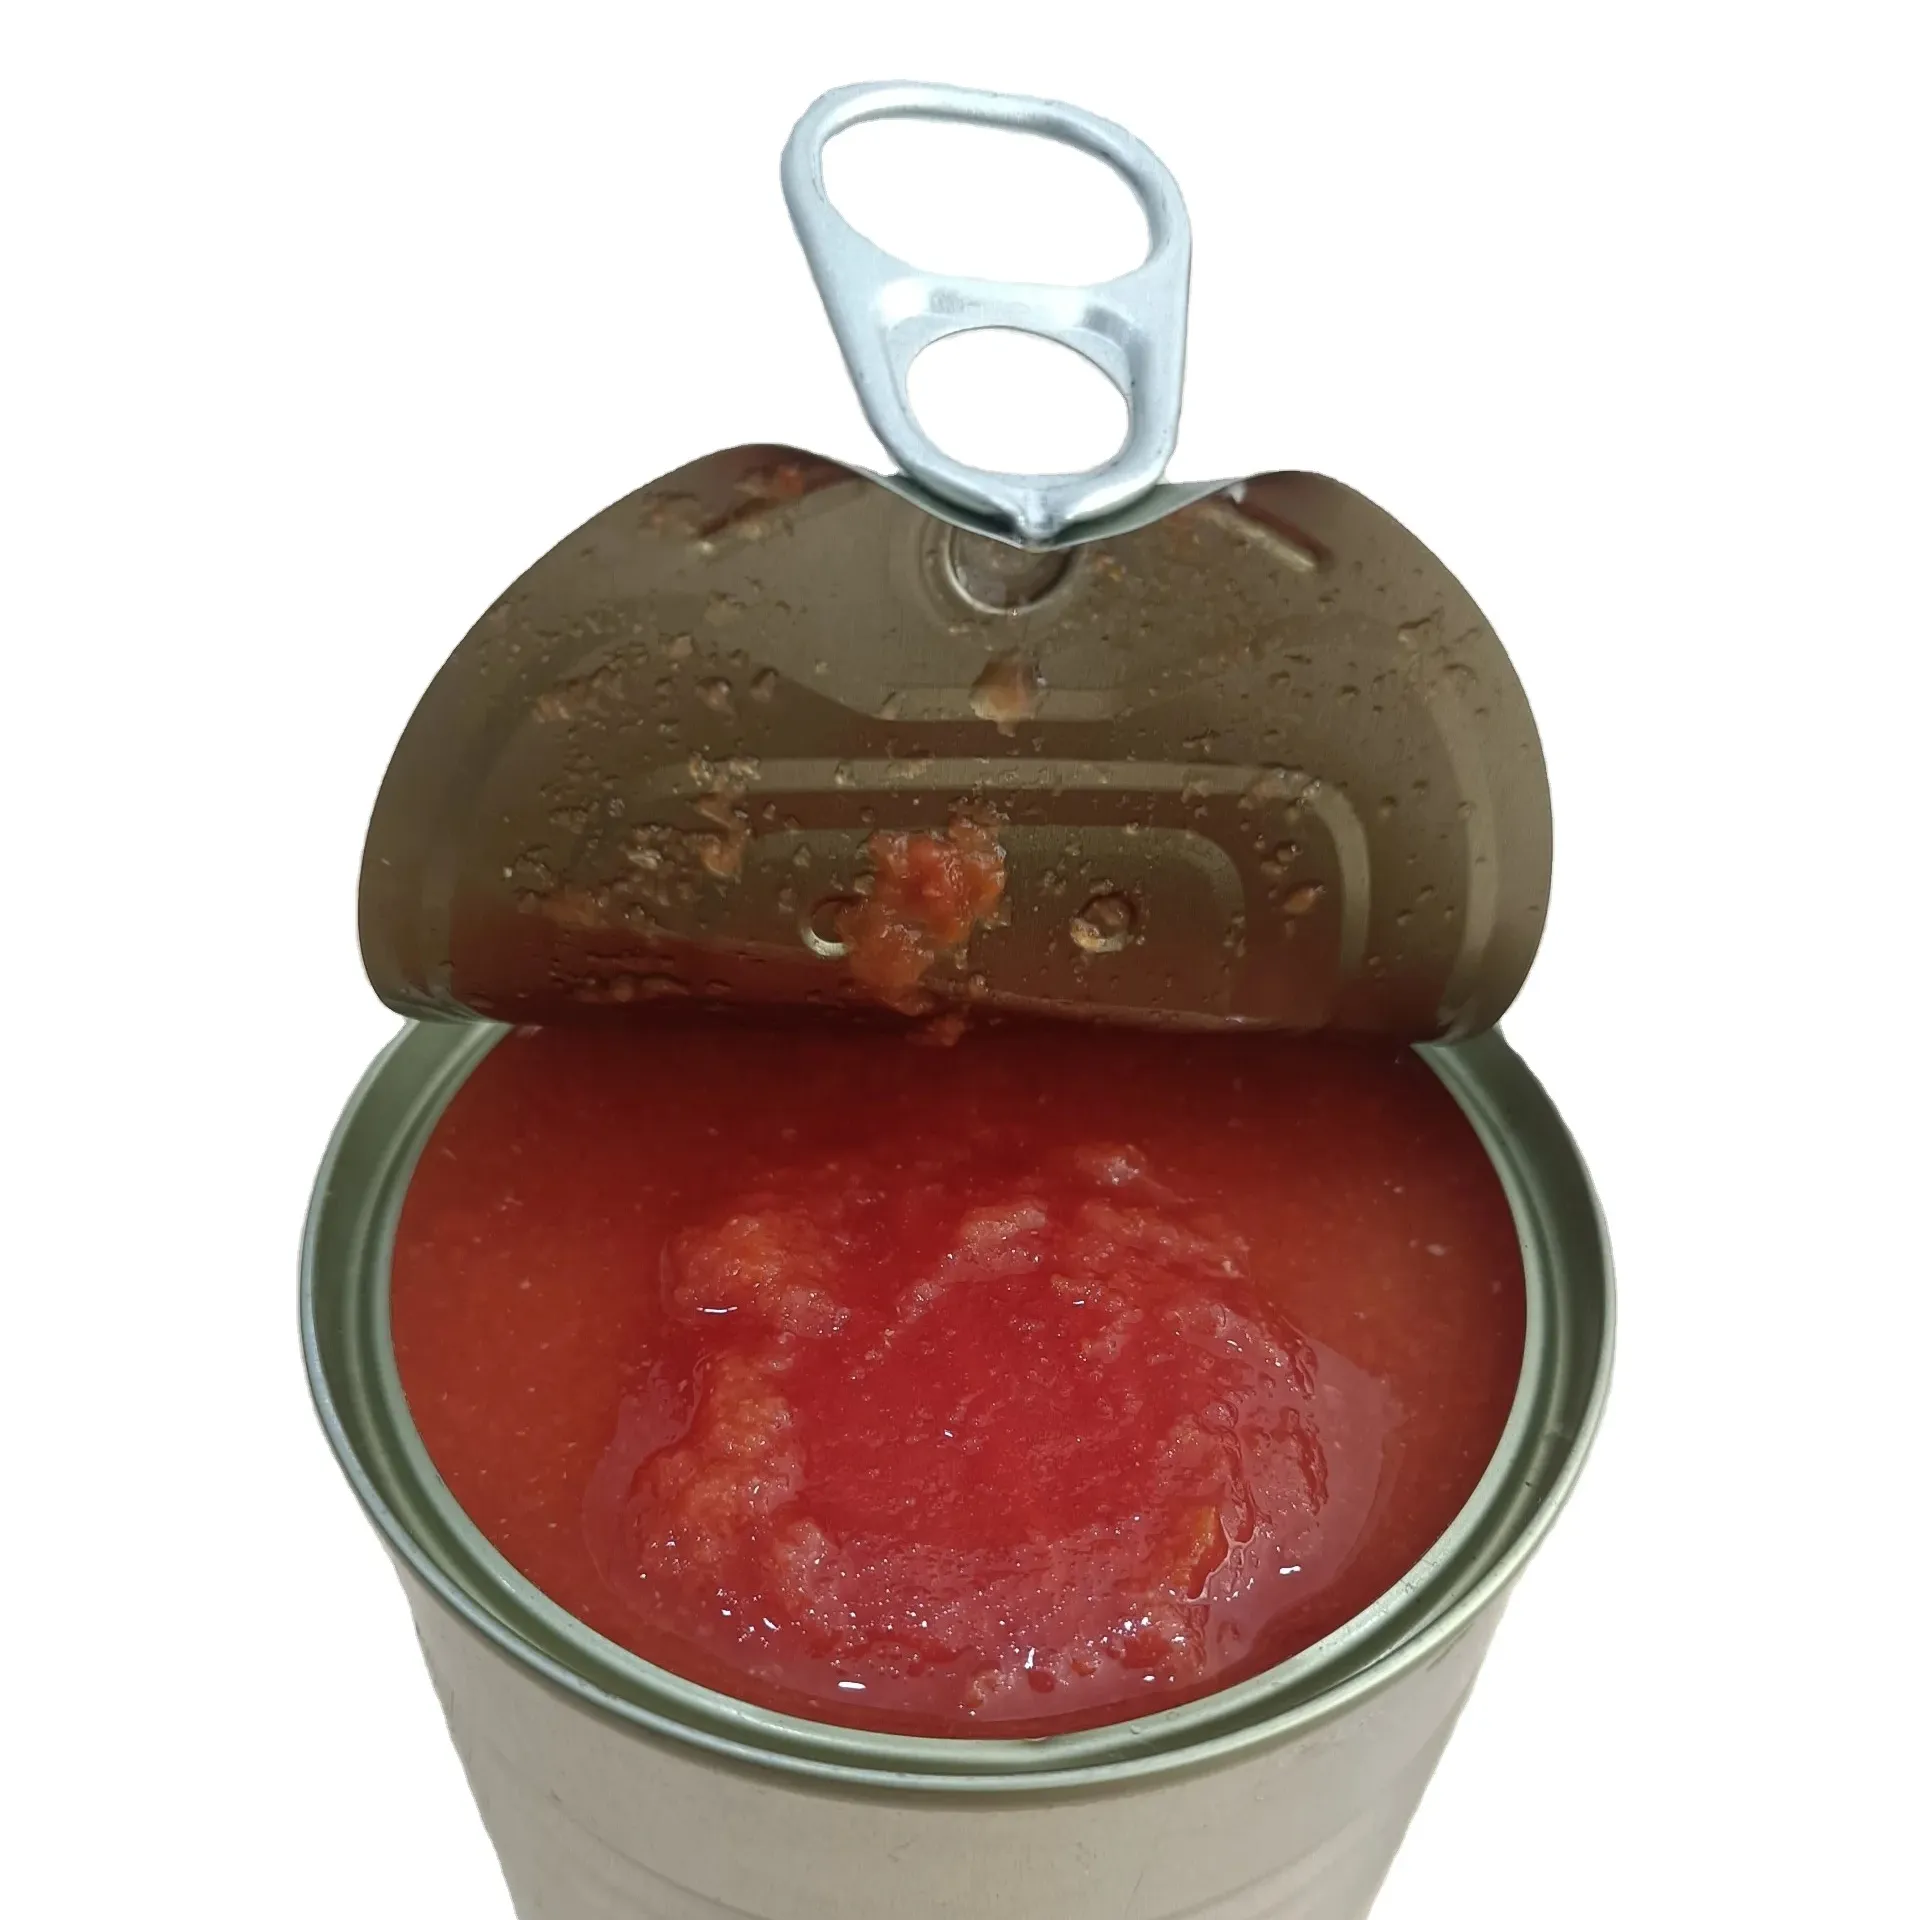 BEST SELLING Preserved Vegetables from Vietnam Whole CANNED Peeled Tomato/ Peeled Tomato In Tomato Juice 15oz (Italian Style)